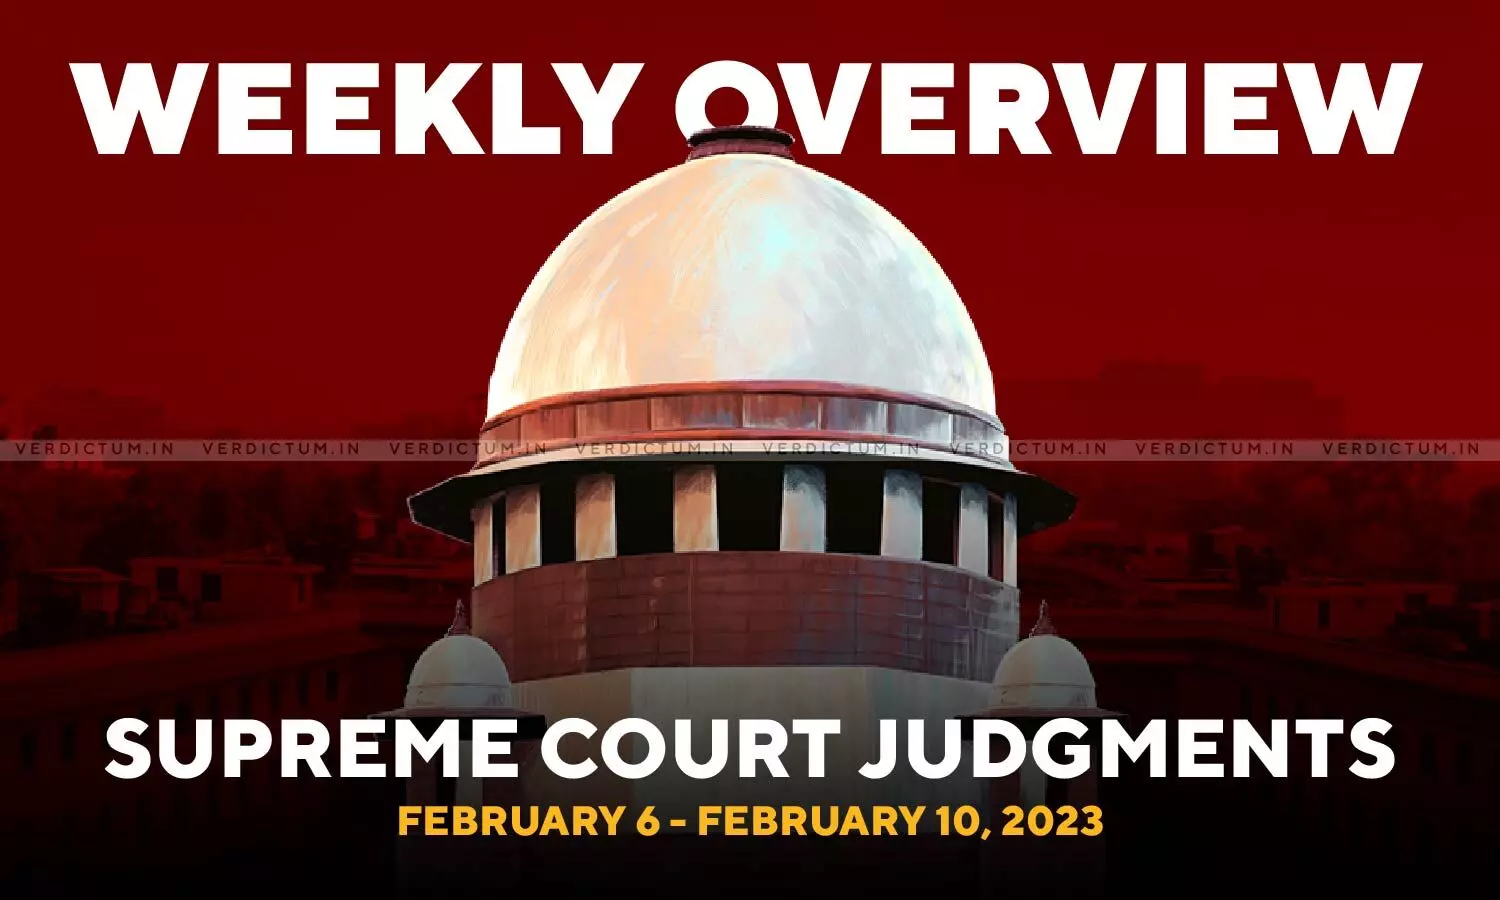 Weekly Overview| Supreme Court Judgments: Feb 06 – Feb 10, 2023